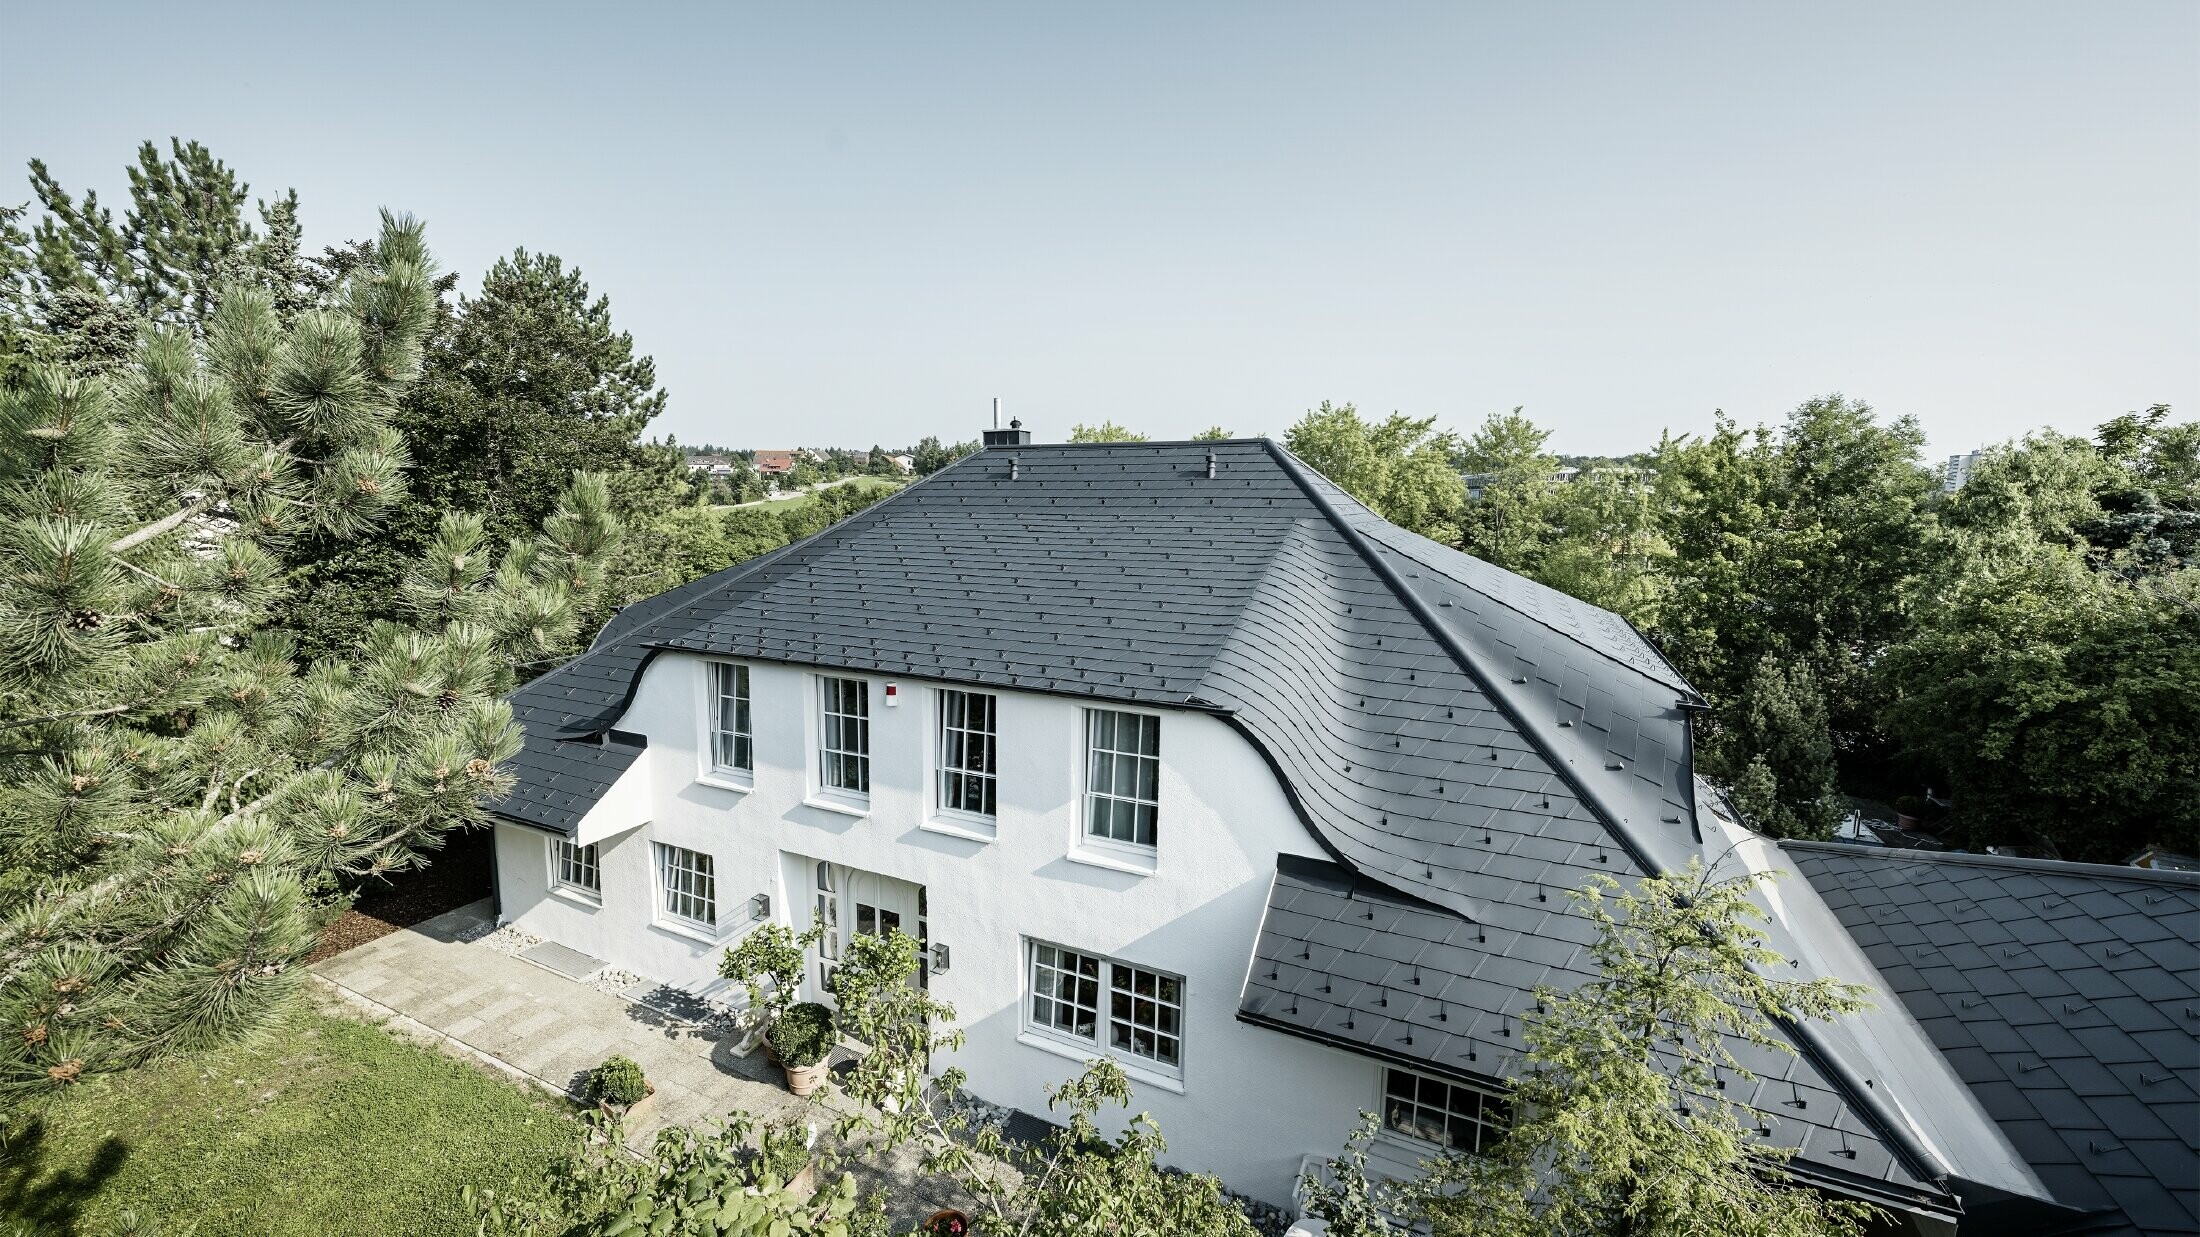 Hipped roof with many curved dormers, covered with DS.19 aluminium roof shingles in anthracite